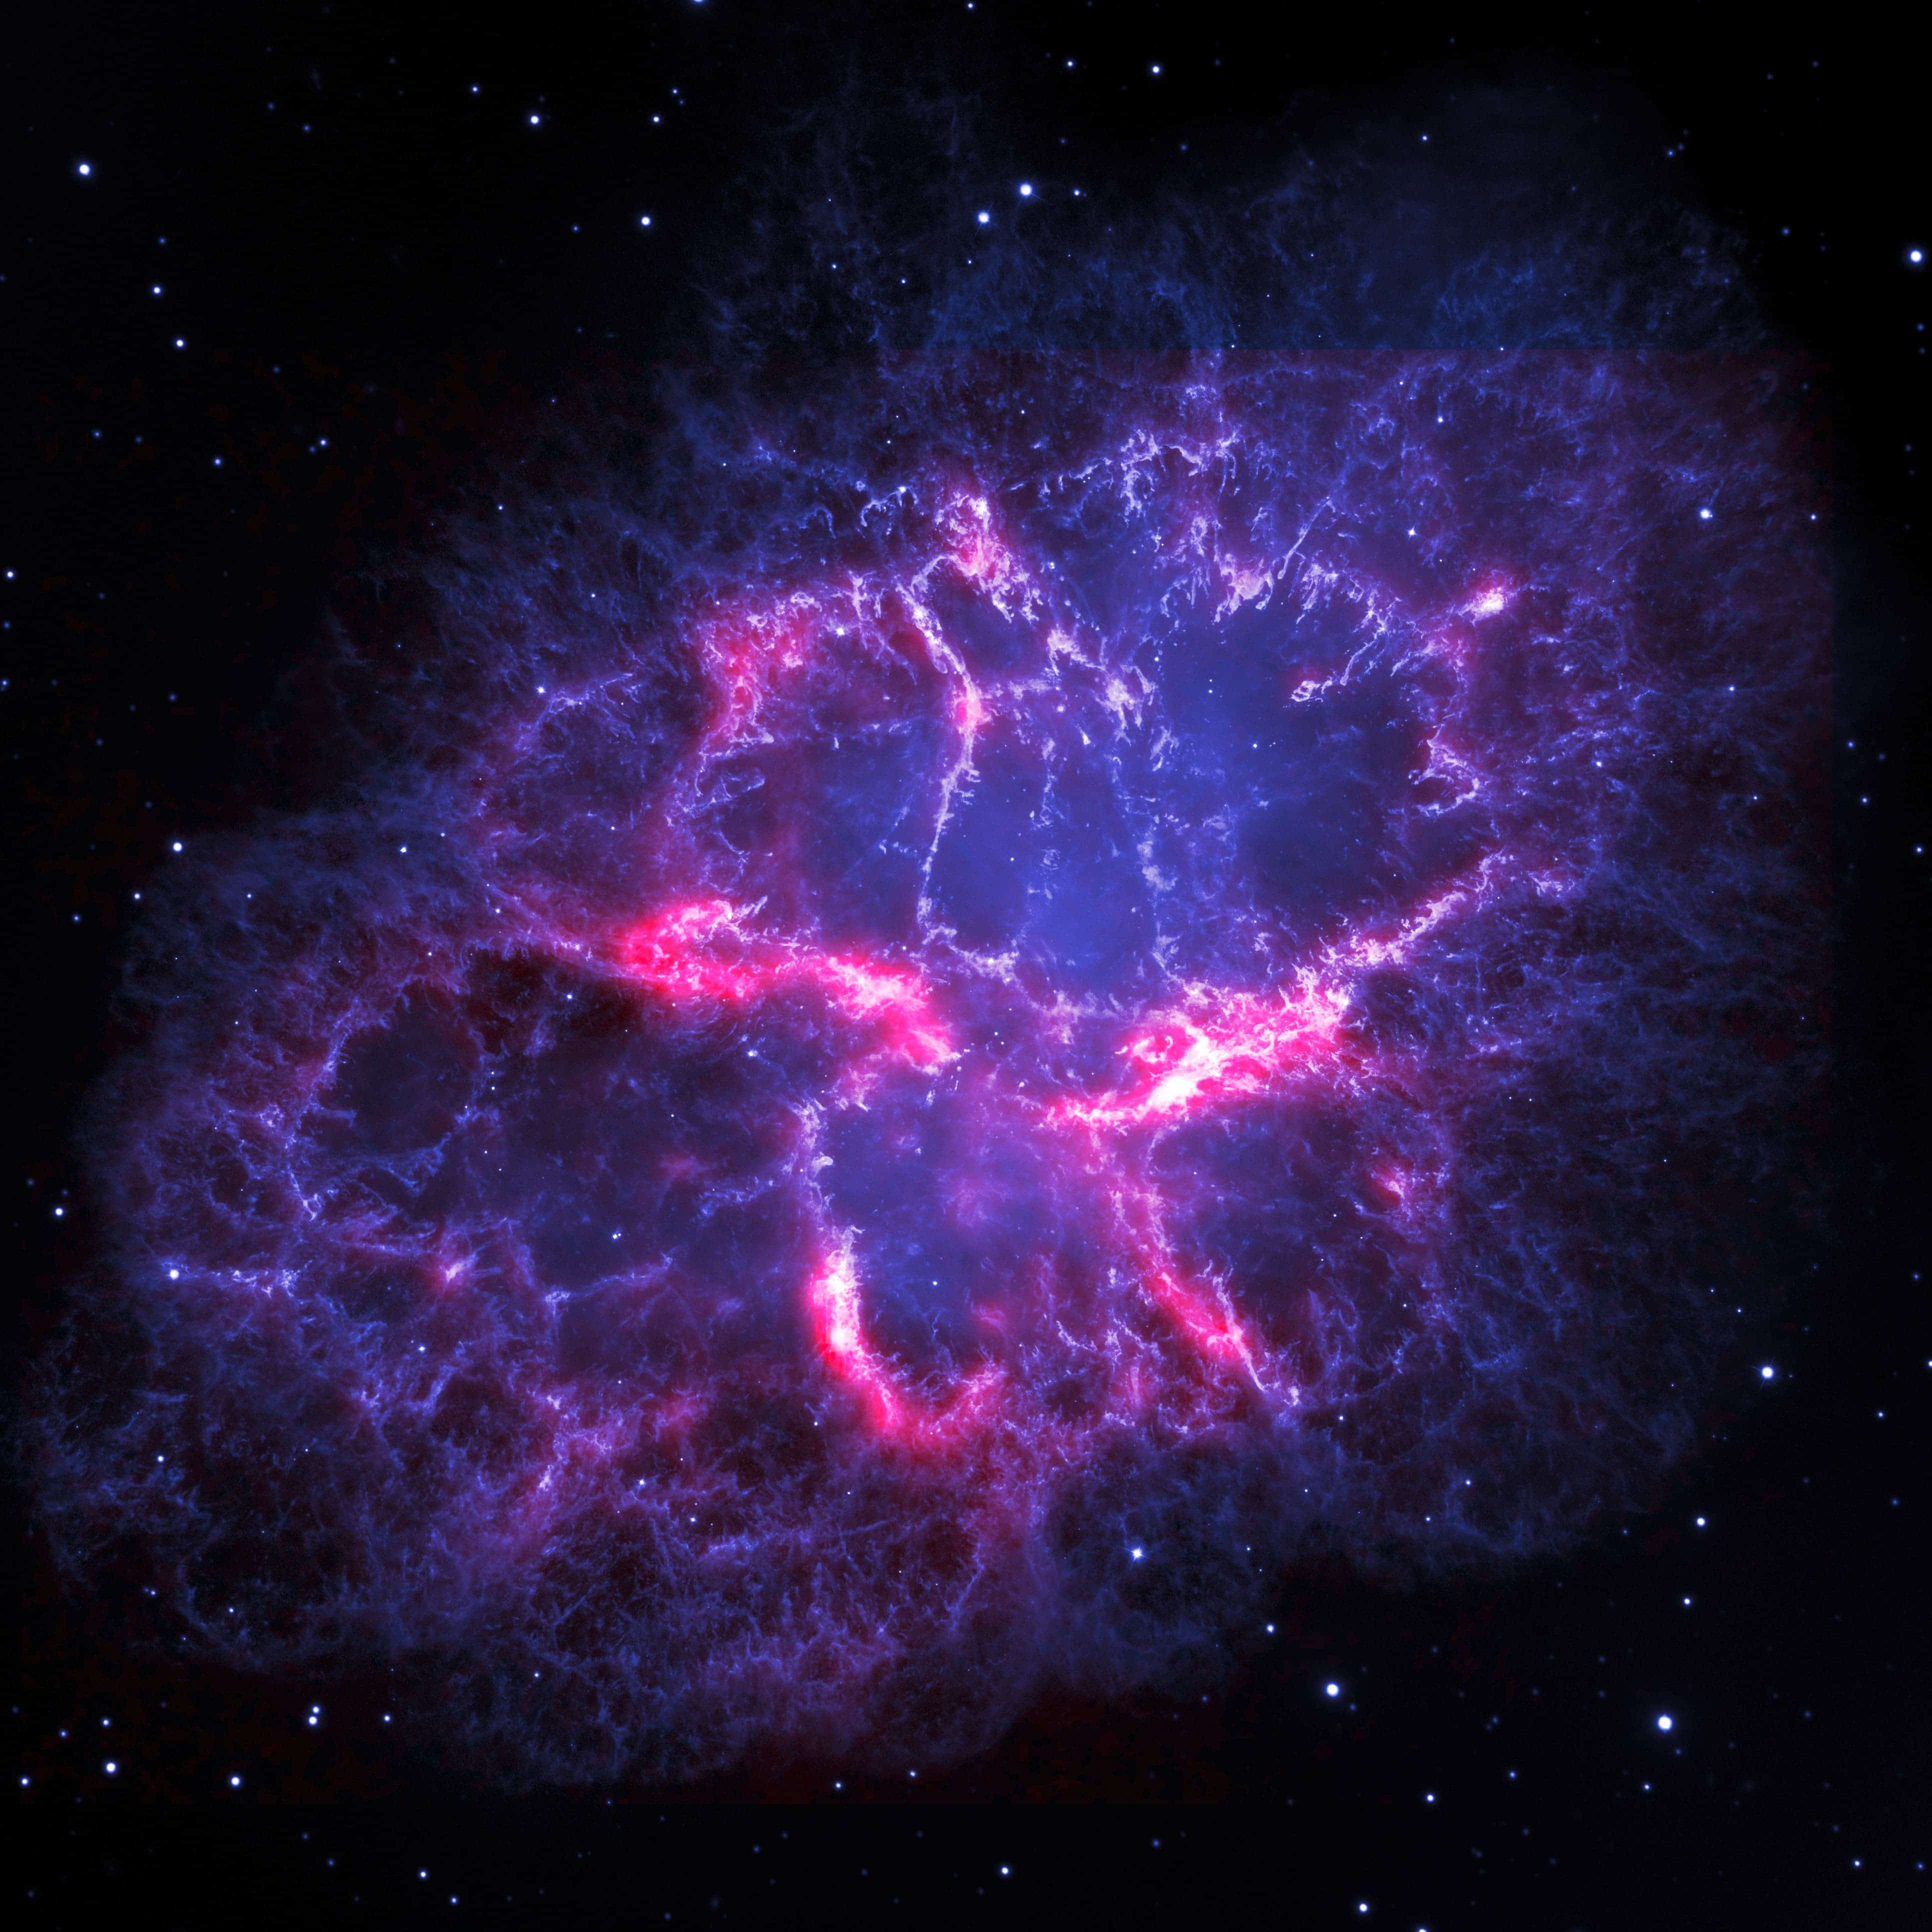 Crab Nebula as seen by Hubble and Herschel. Credit: Wikimedia Commons.